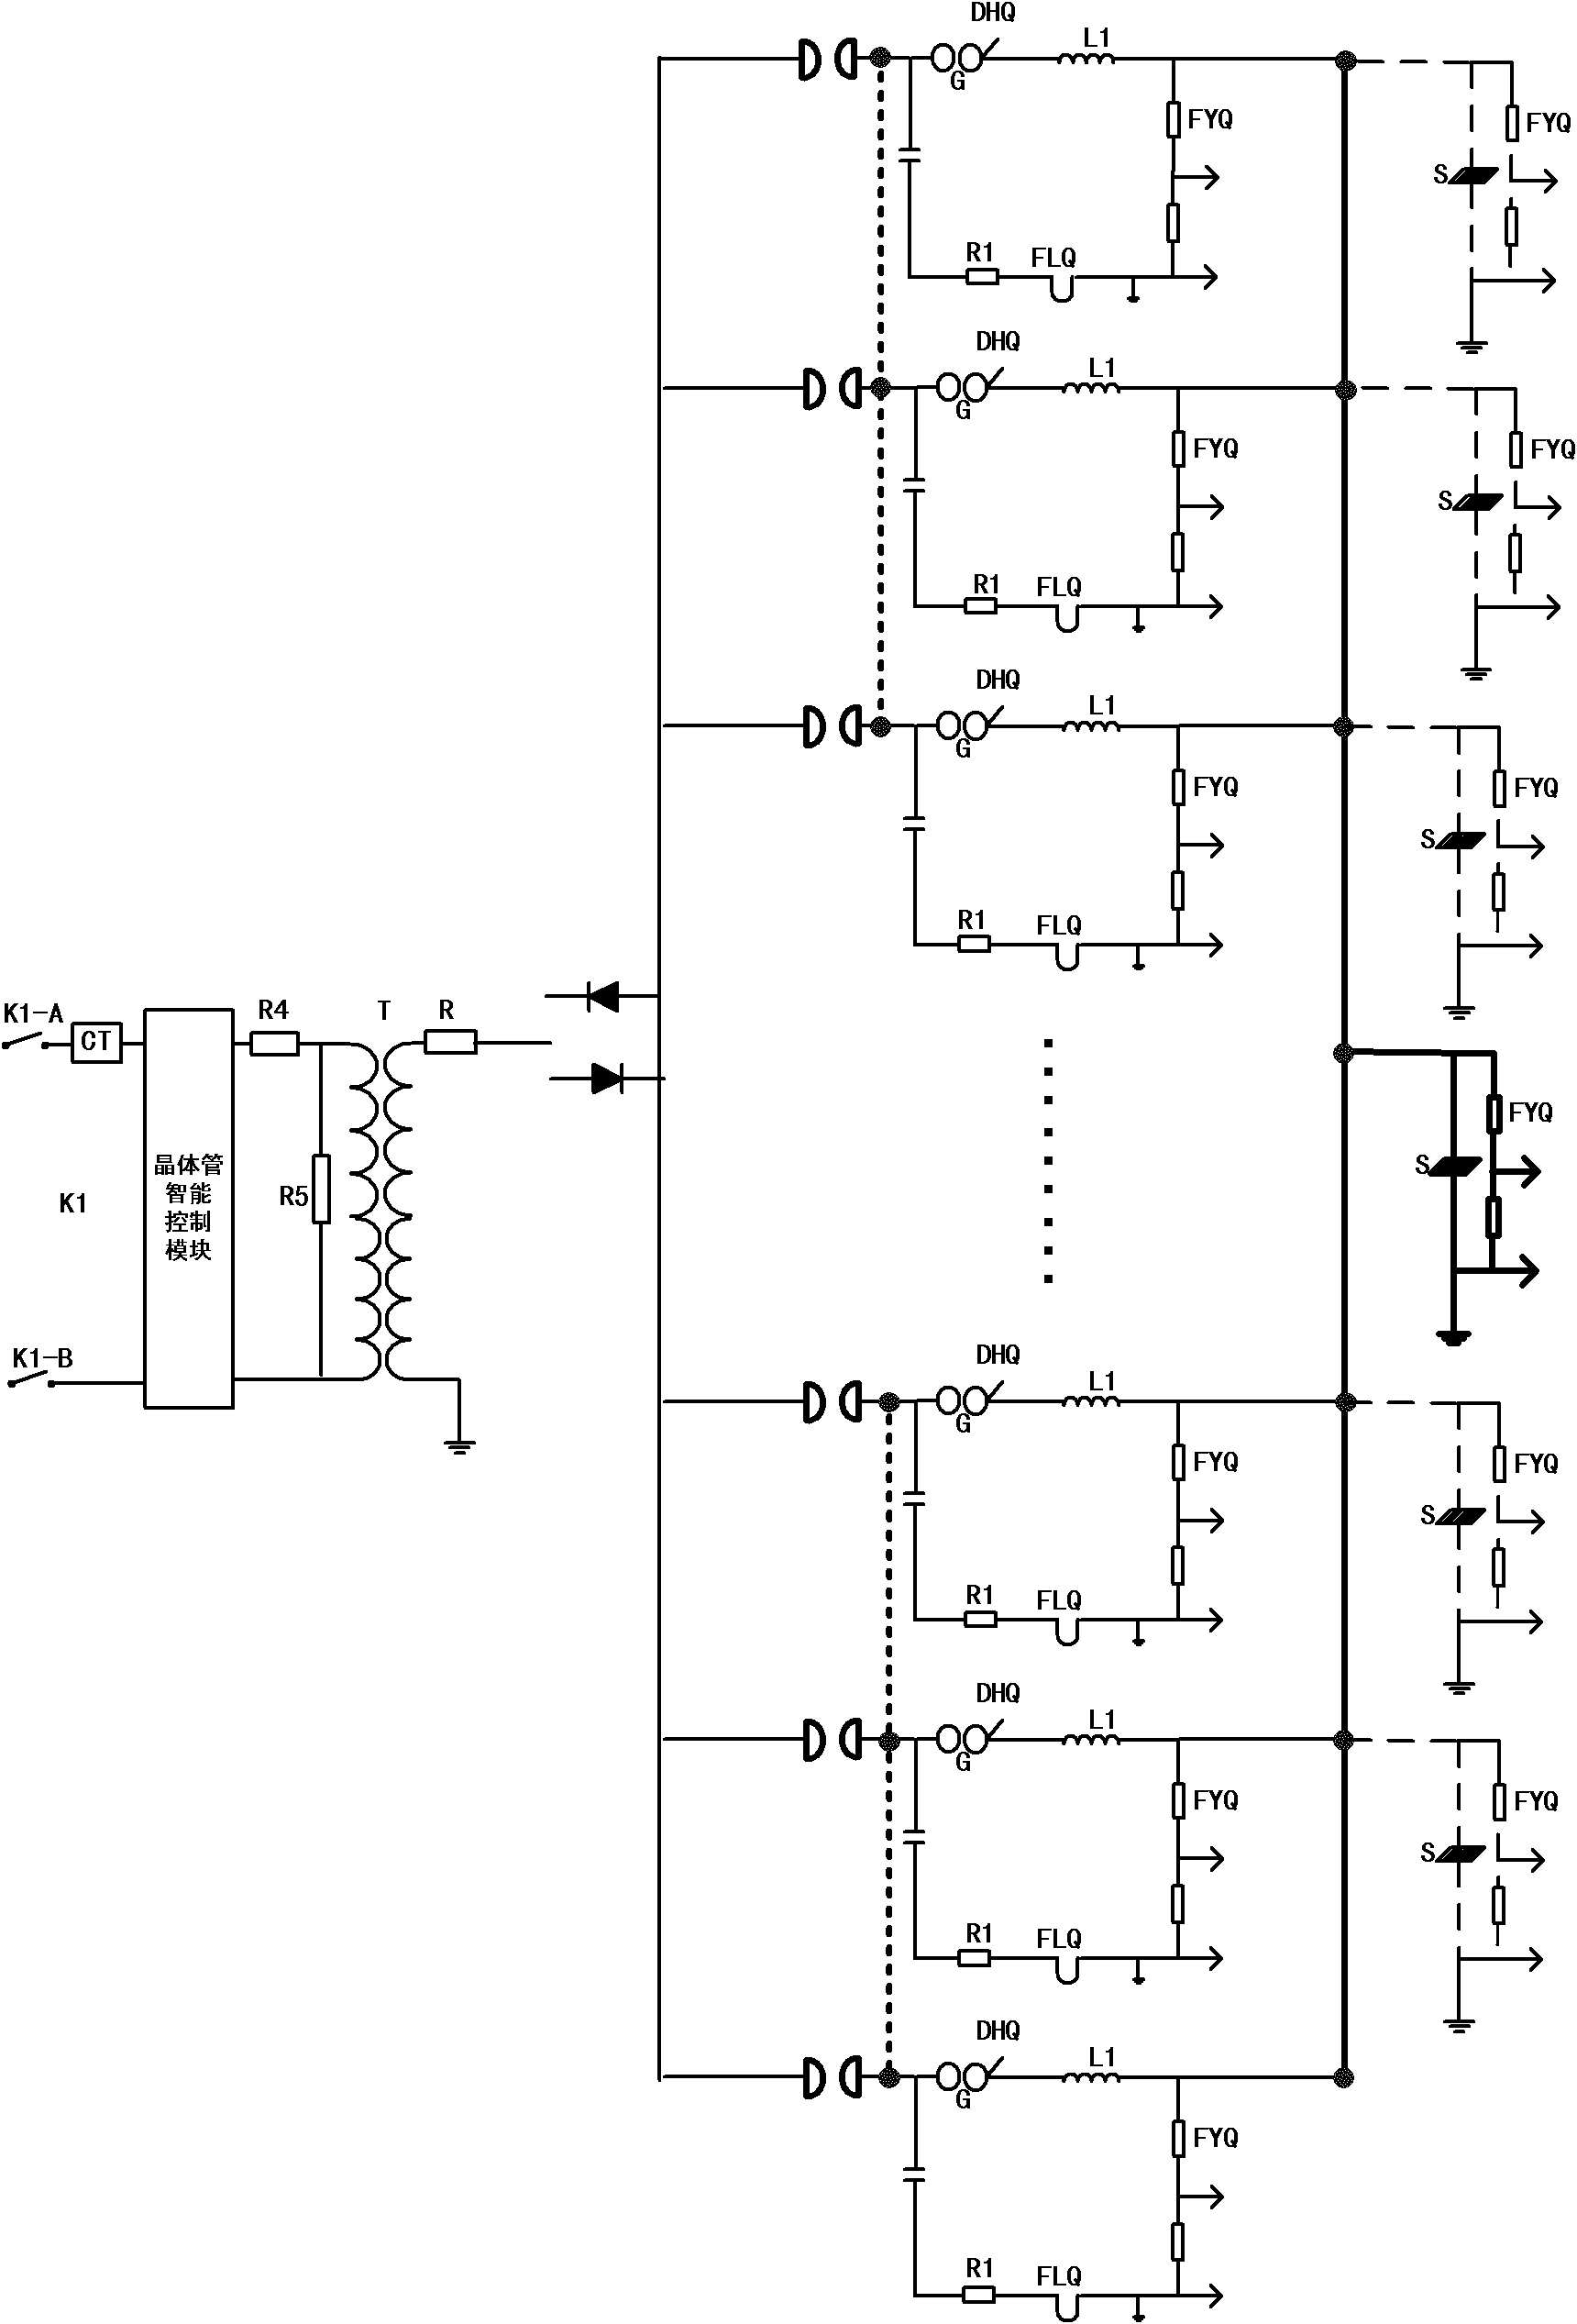 Experimental device for multiple lightning current return strokes of surge protection device (SPD)